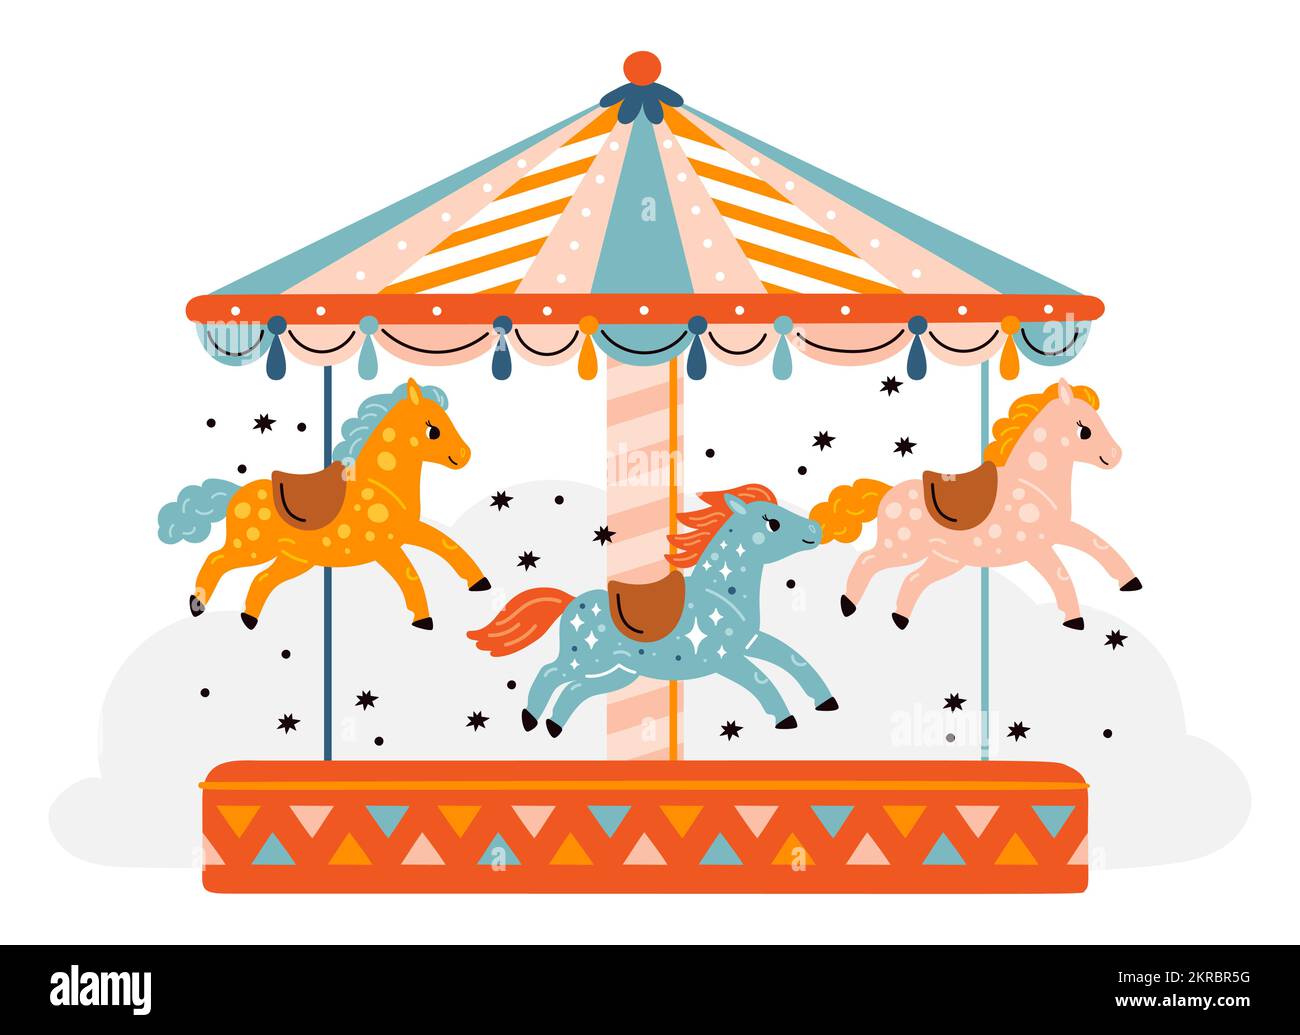 Horses carousel. Kids park attraction. Carnival wheel with funny ponies. Decorative equine animals. Round rides. Rotating entertainment device Stock Vector